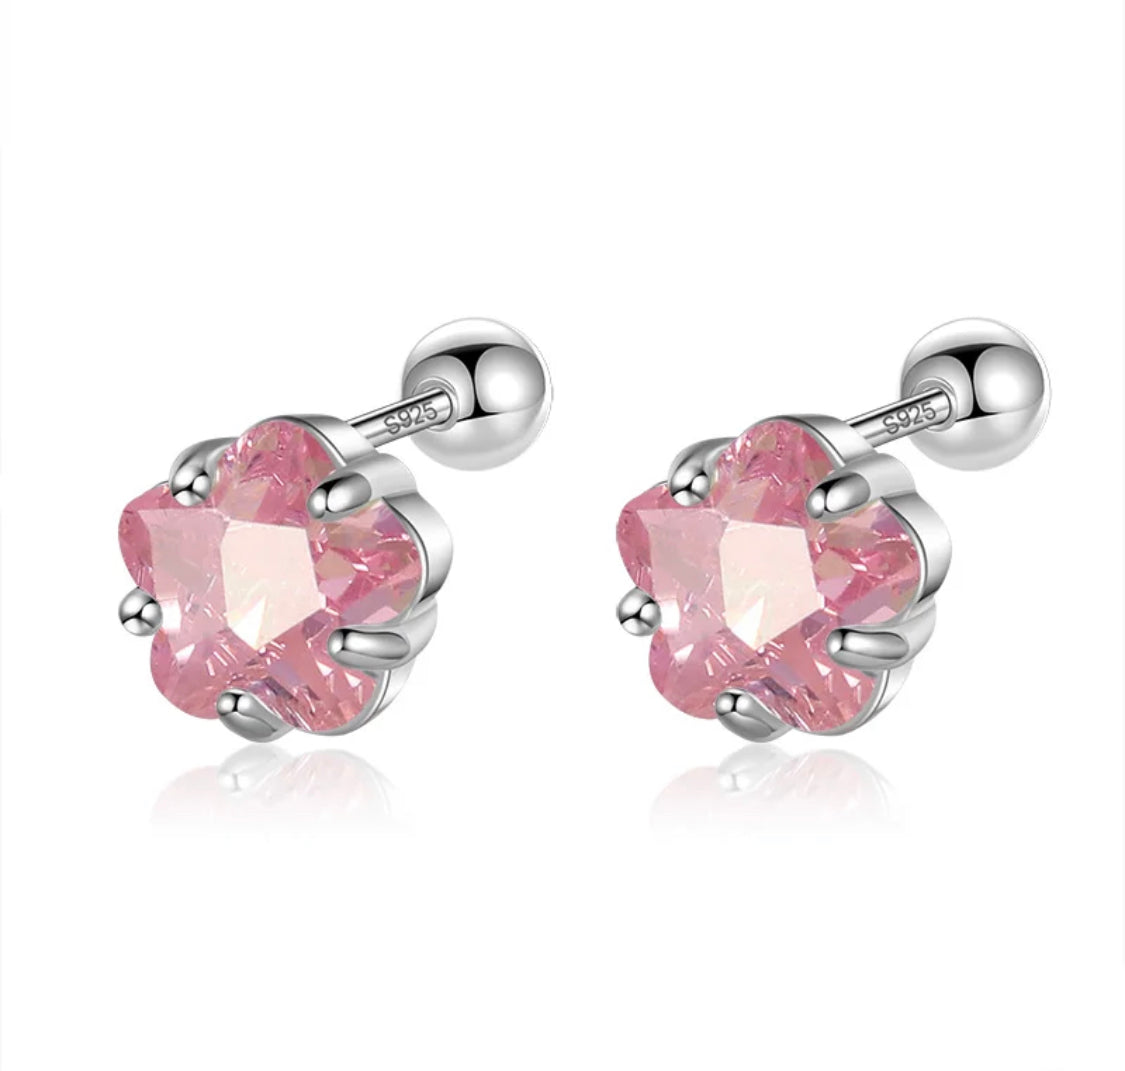 925 Sterling Silver Rhodium Plated 6 mm Pink CZ Stones Screw Back Earrings For Baby, Kids, Teens